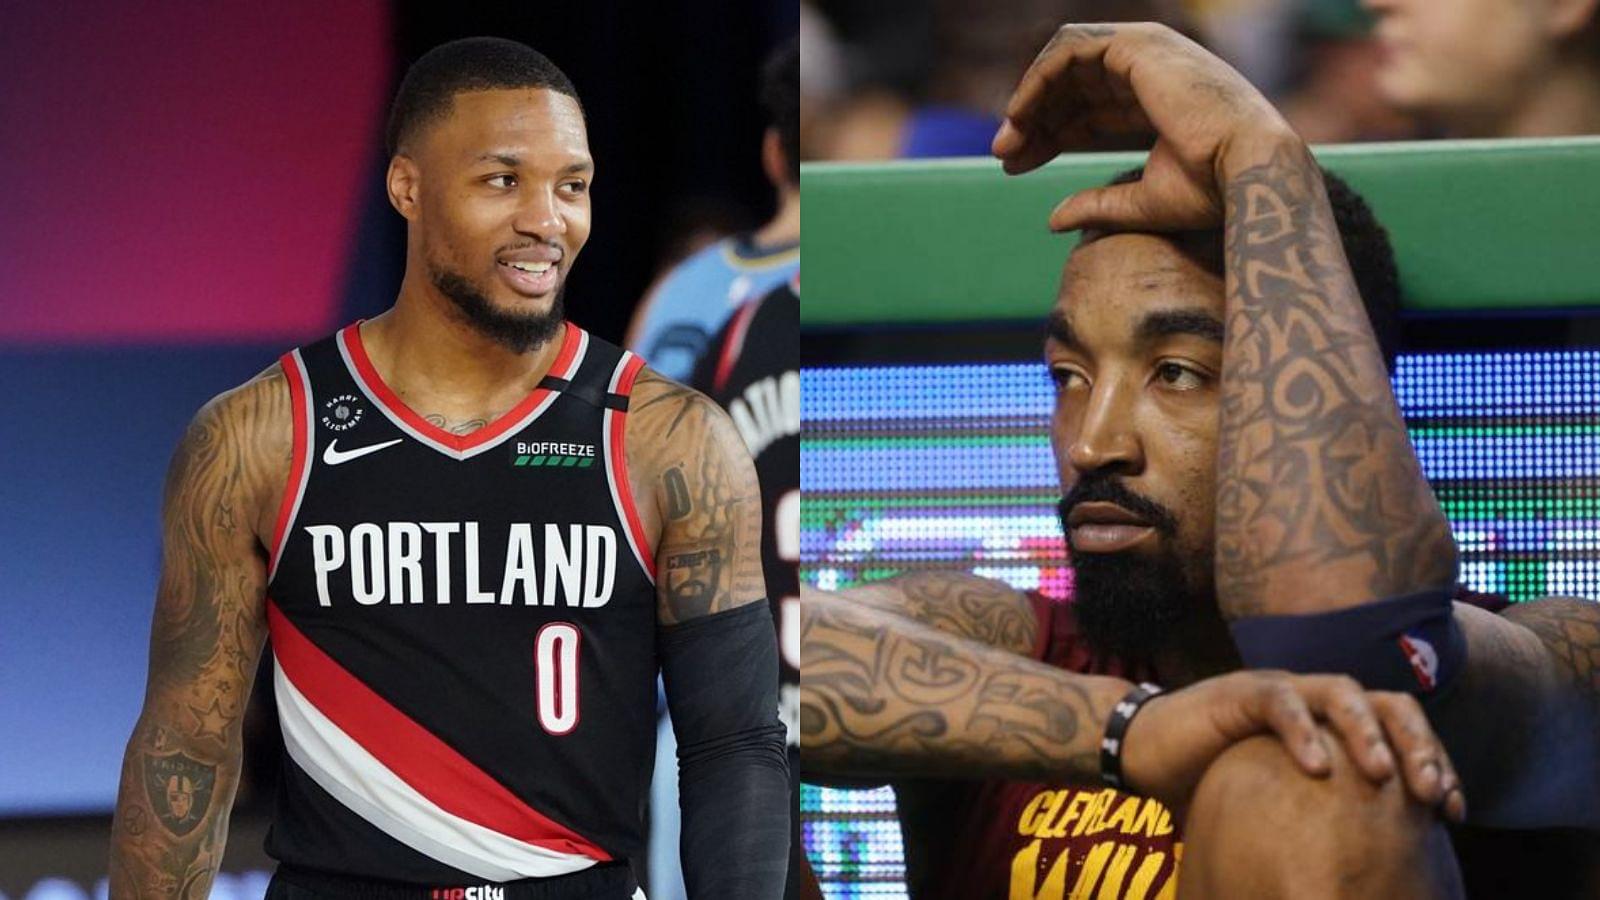 $35 million worth JR Smith finds it “unbelievable” that $60M/year star Damian Lillard wants to “rot” in Portland